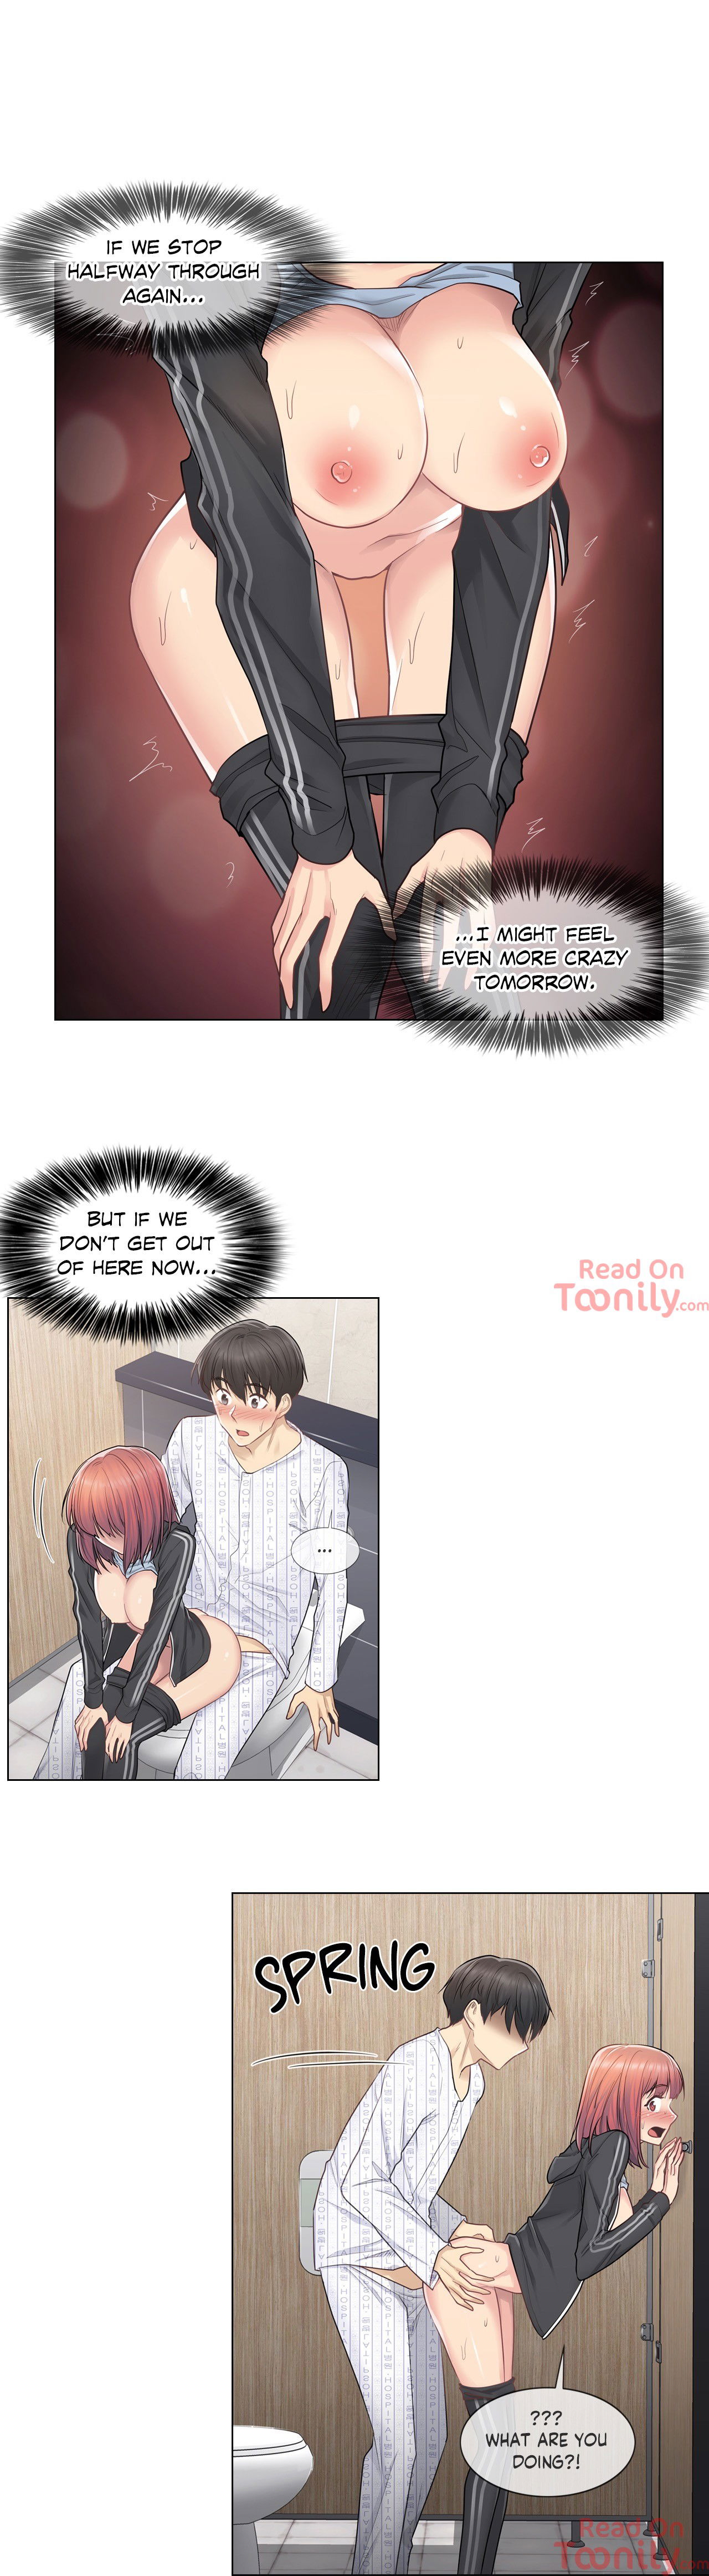 touch-to-unlock-chap-6-15